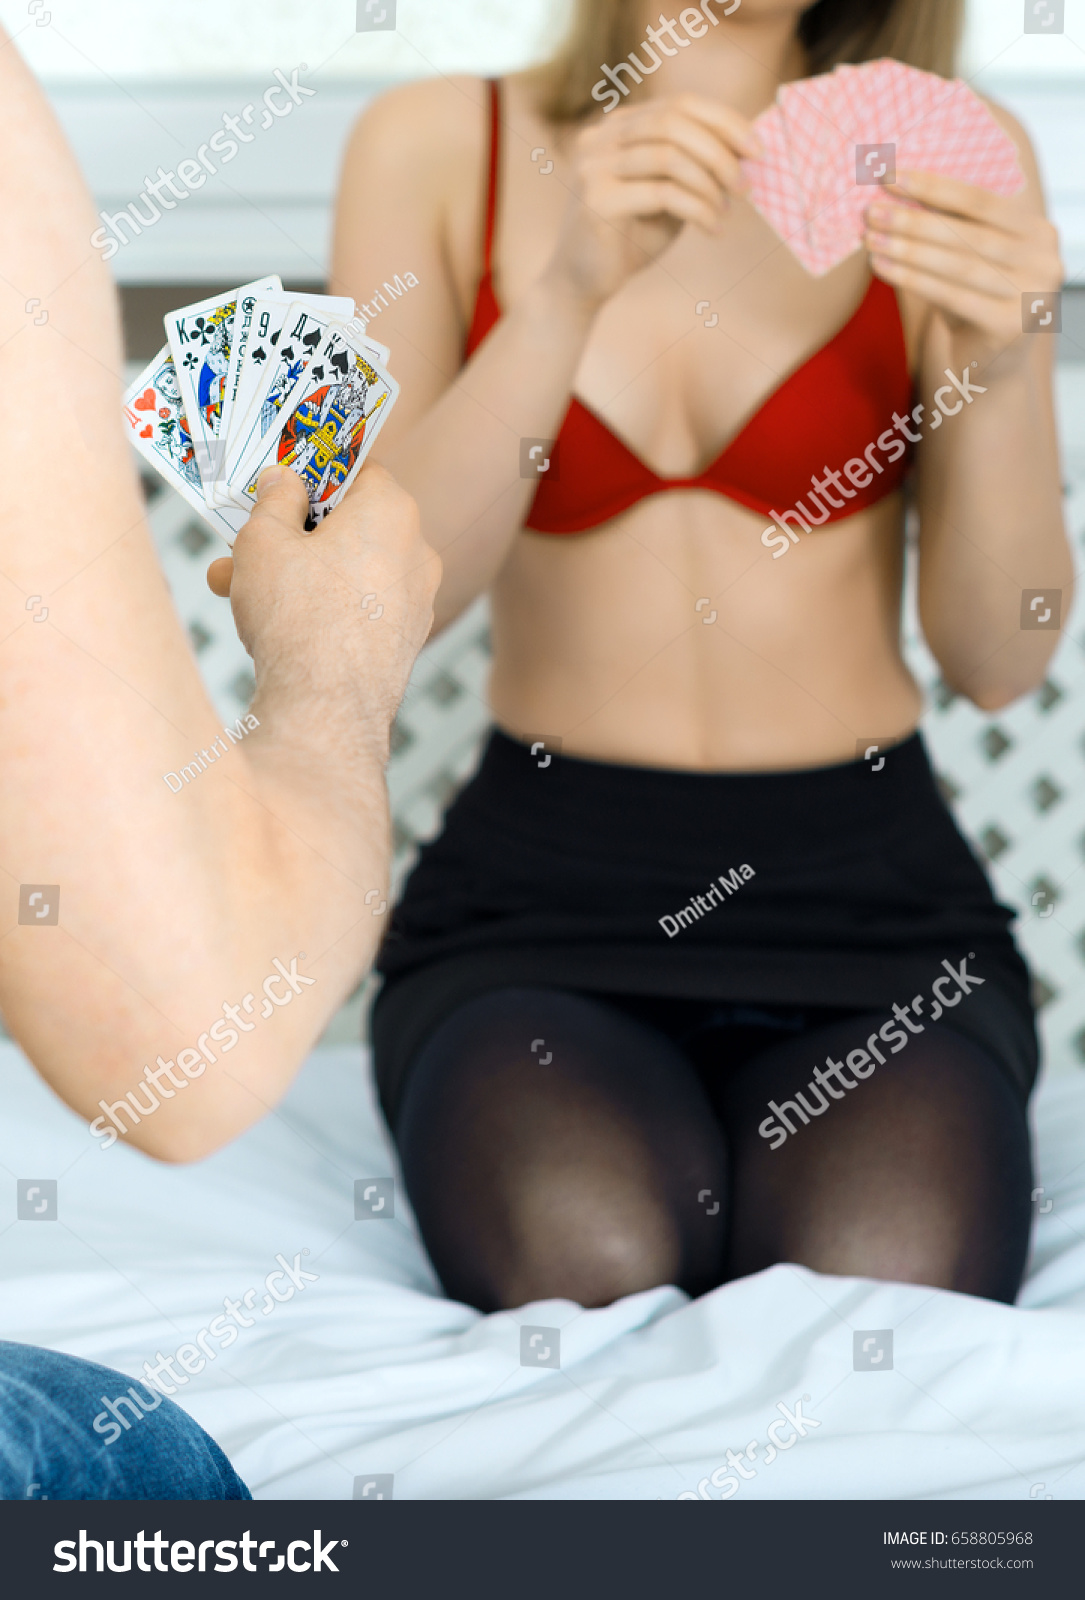 Best of Couples playing strip poker